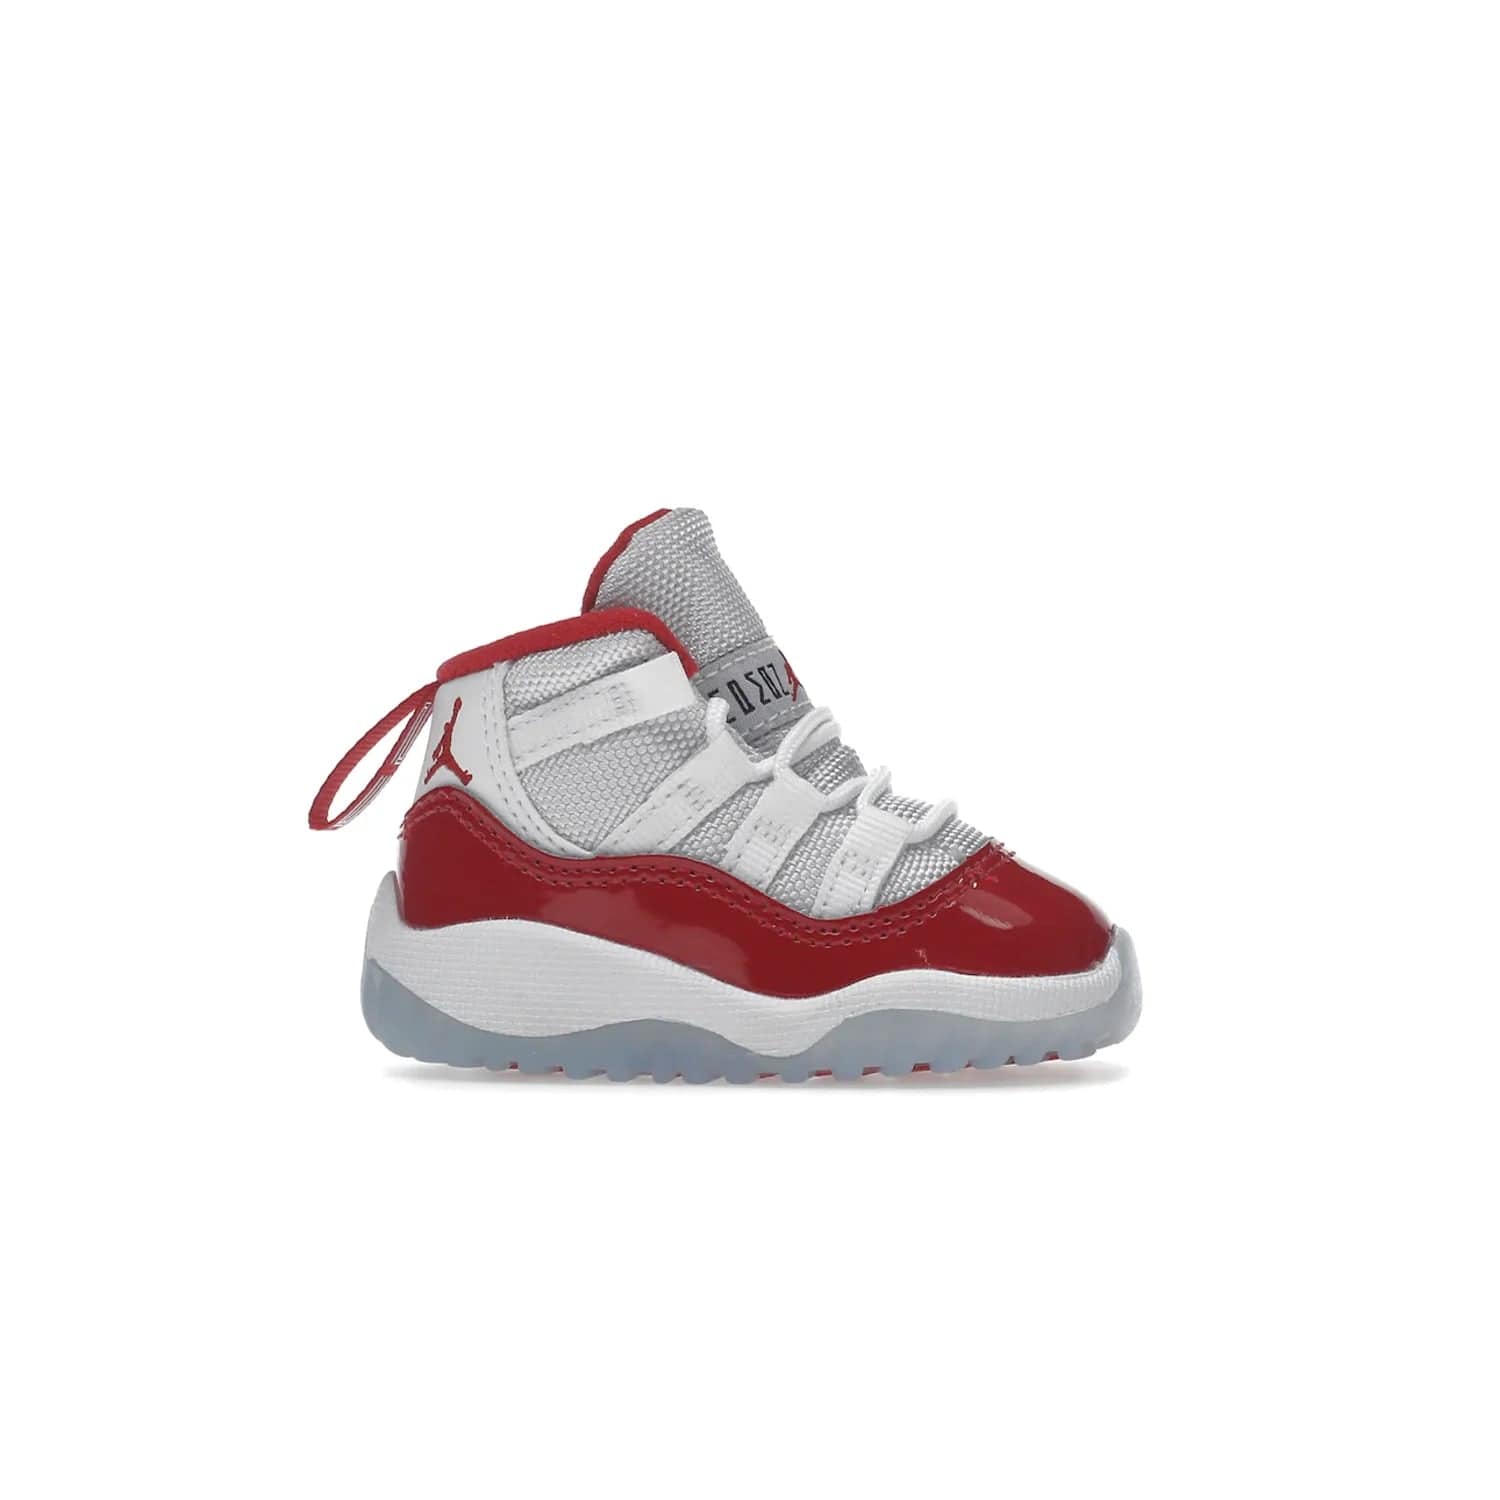 Jordan 11 Retro Cherry (2022) (TD) - Image 2 - Only at www.BallersClubKickz.com - Timeless classic. Air Jordan 11 Retro Cherry 2022 TD combines mesh, leather & suede for a unique look. White upper with varsity red suede. Jumpman logo on collar & tongue. Available Dec 10th, priced at $80.